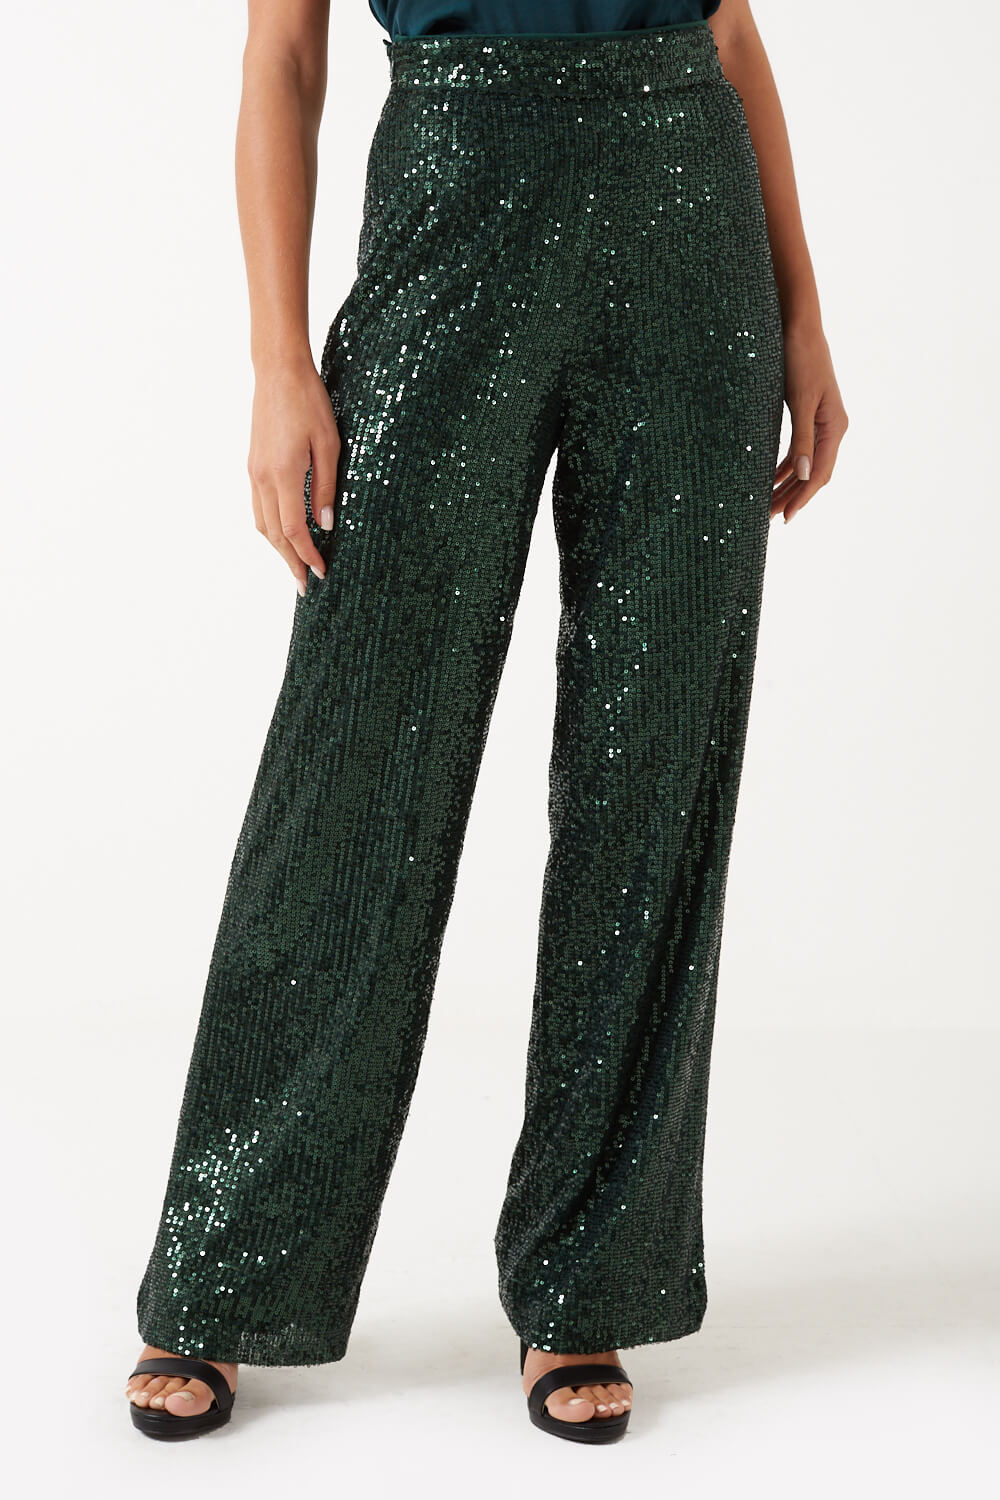 Marc Angelo Chloe High Waist Sequin Trousers in Champagne